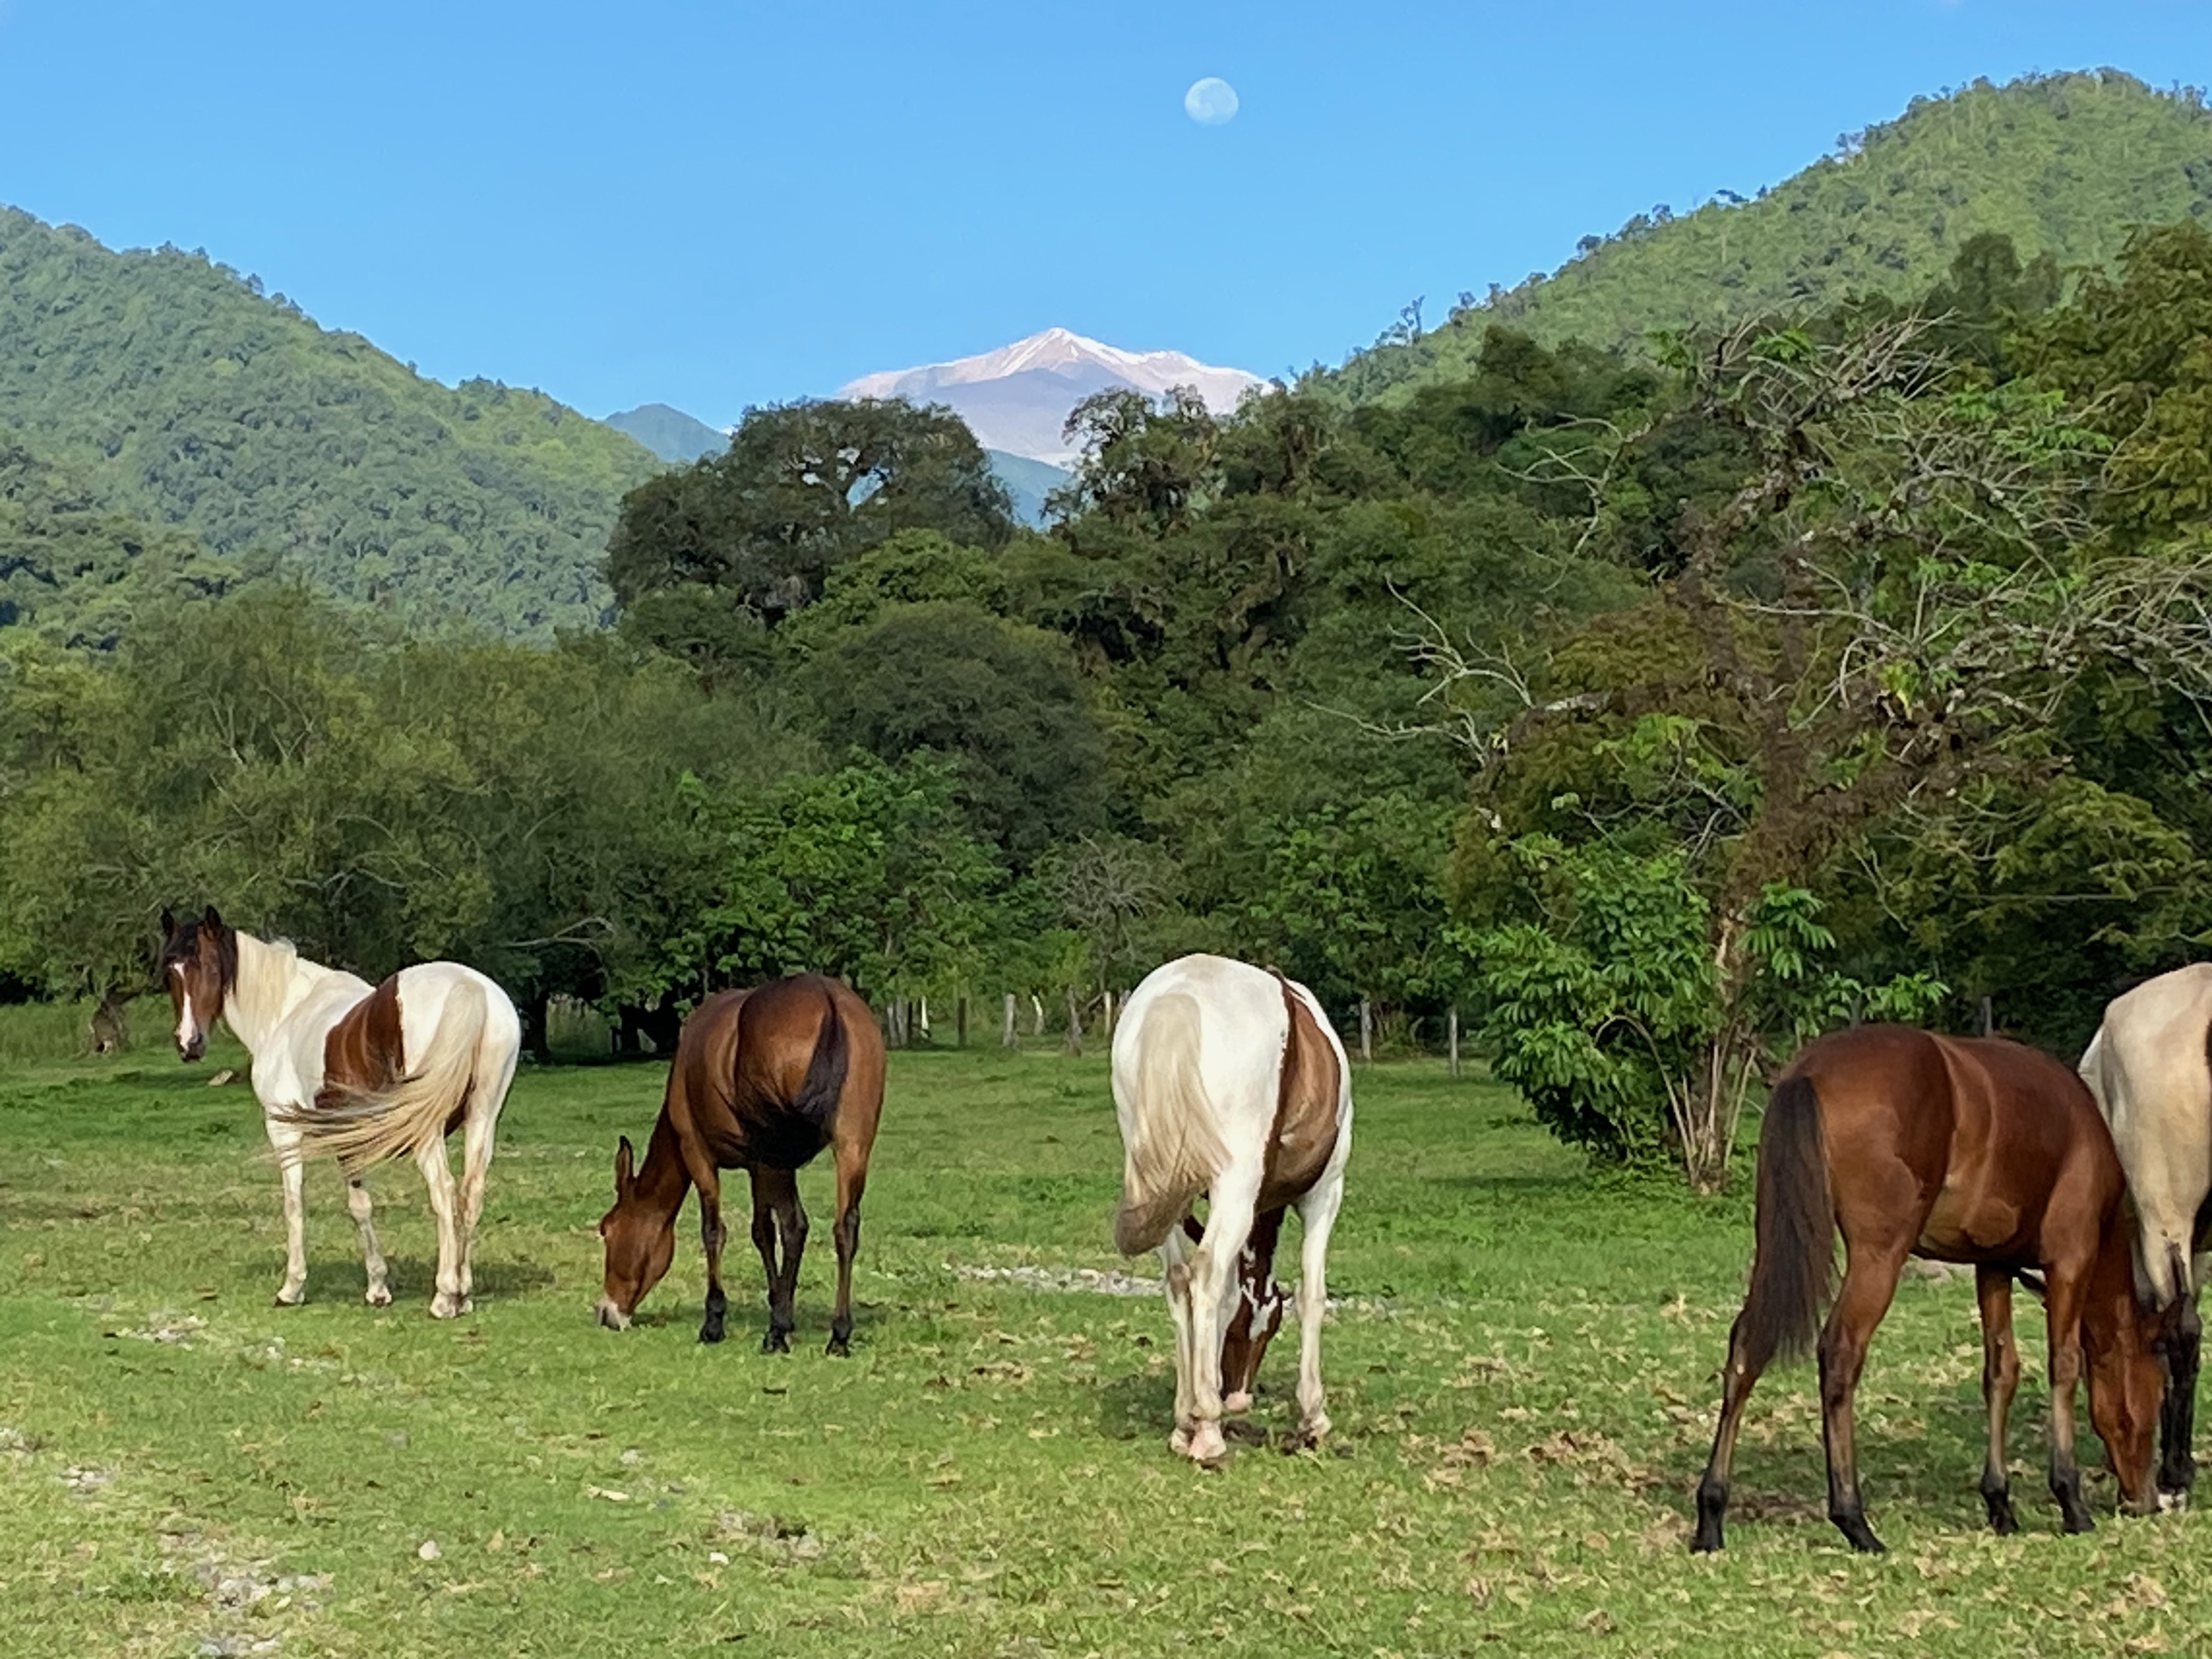 Four horses alternating between brown and white and brown standing in green grass in front of hills of green trees. A mountain emerges from behind the trees, capped with snow. The moon is visible off-center above the mountain.